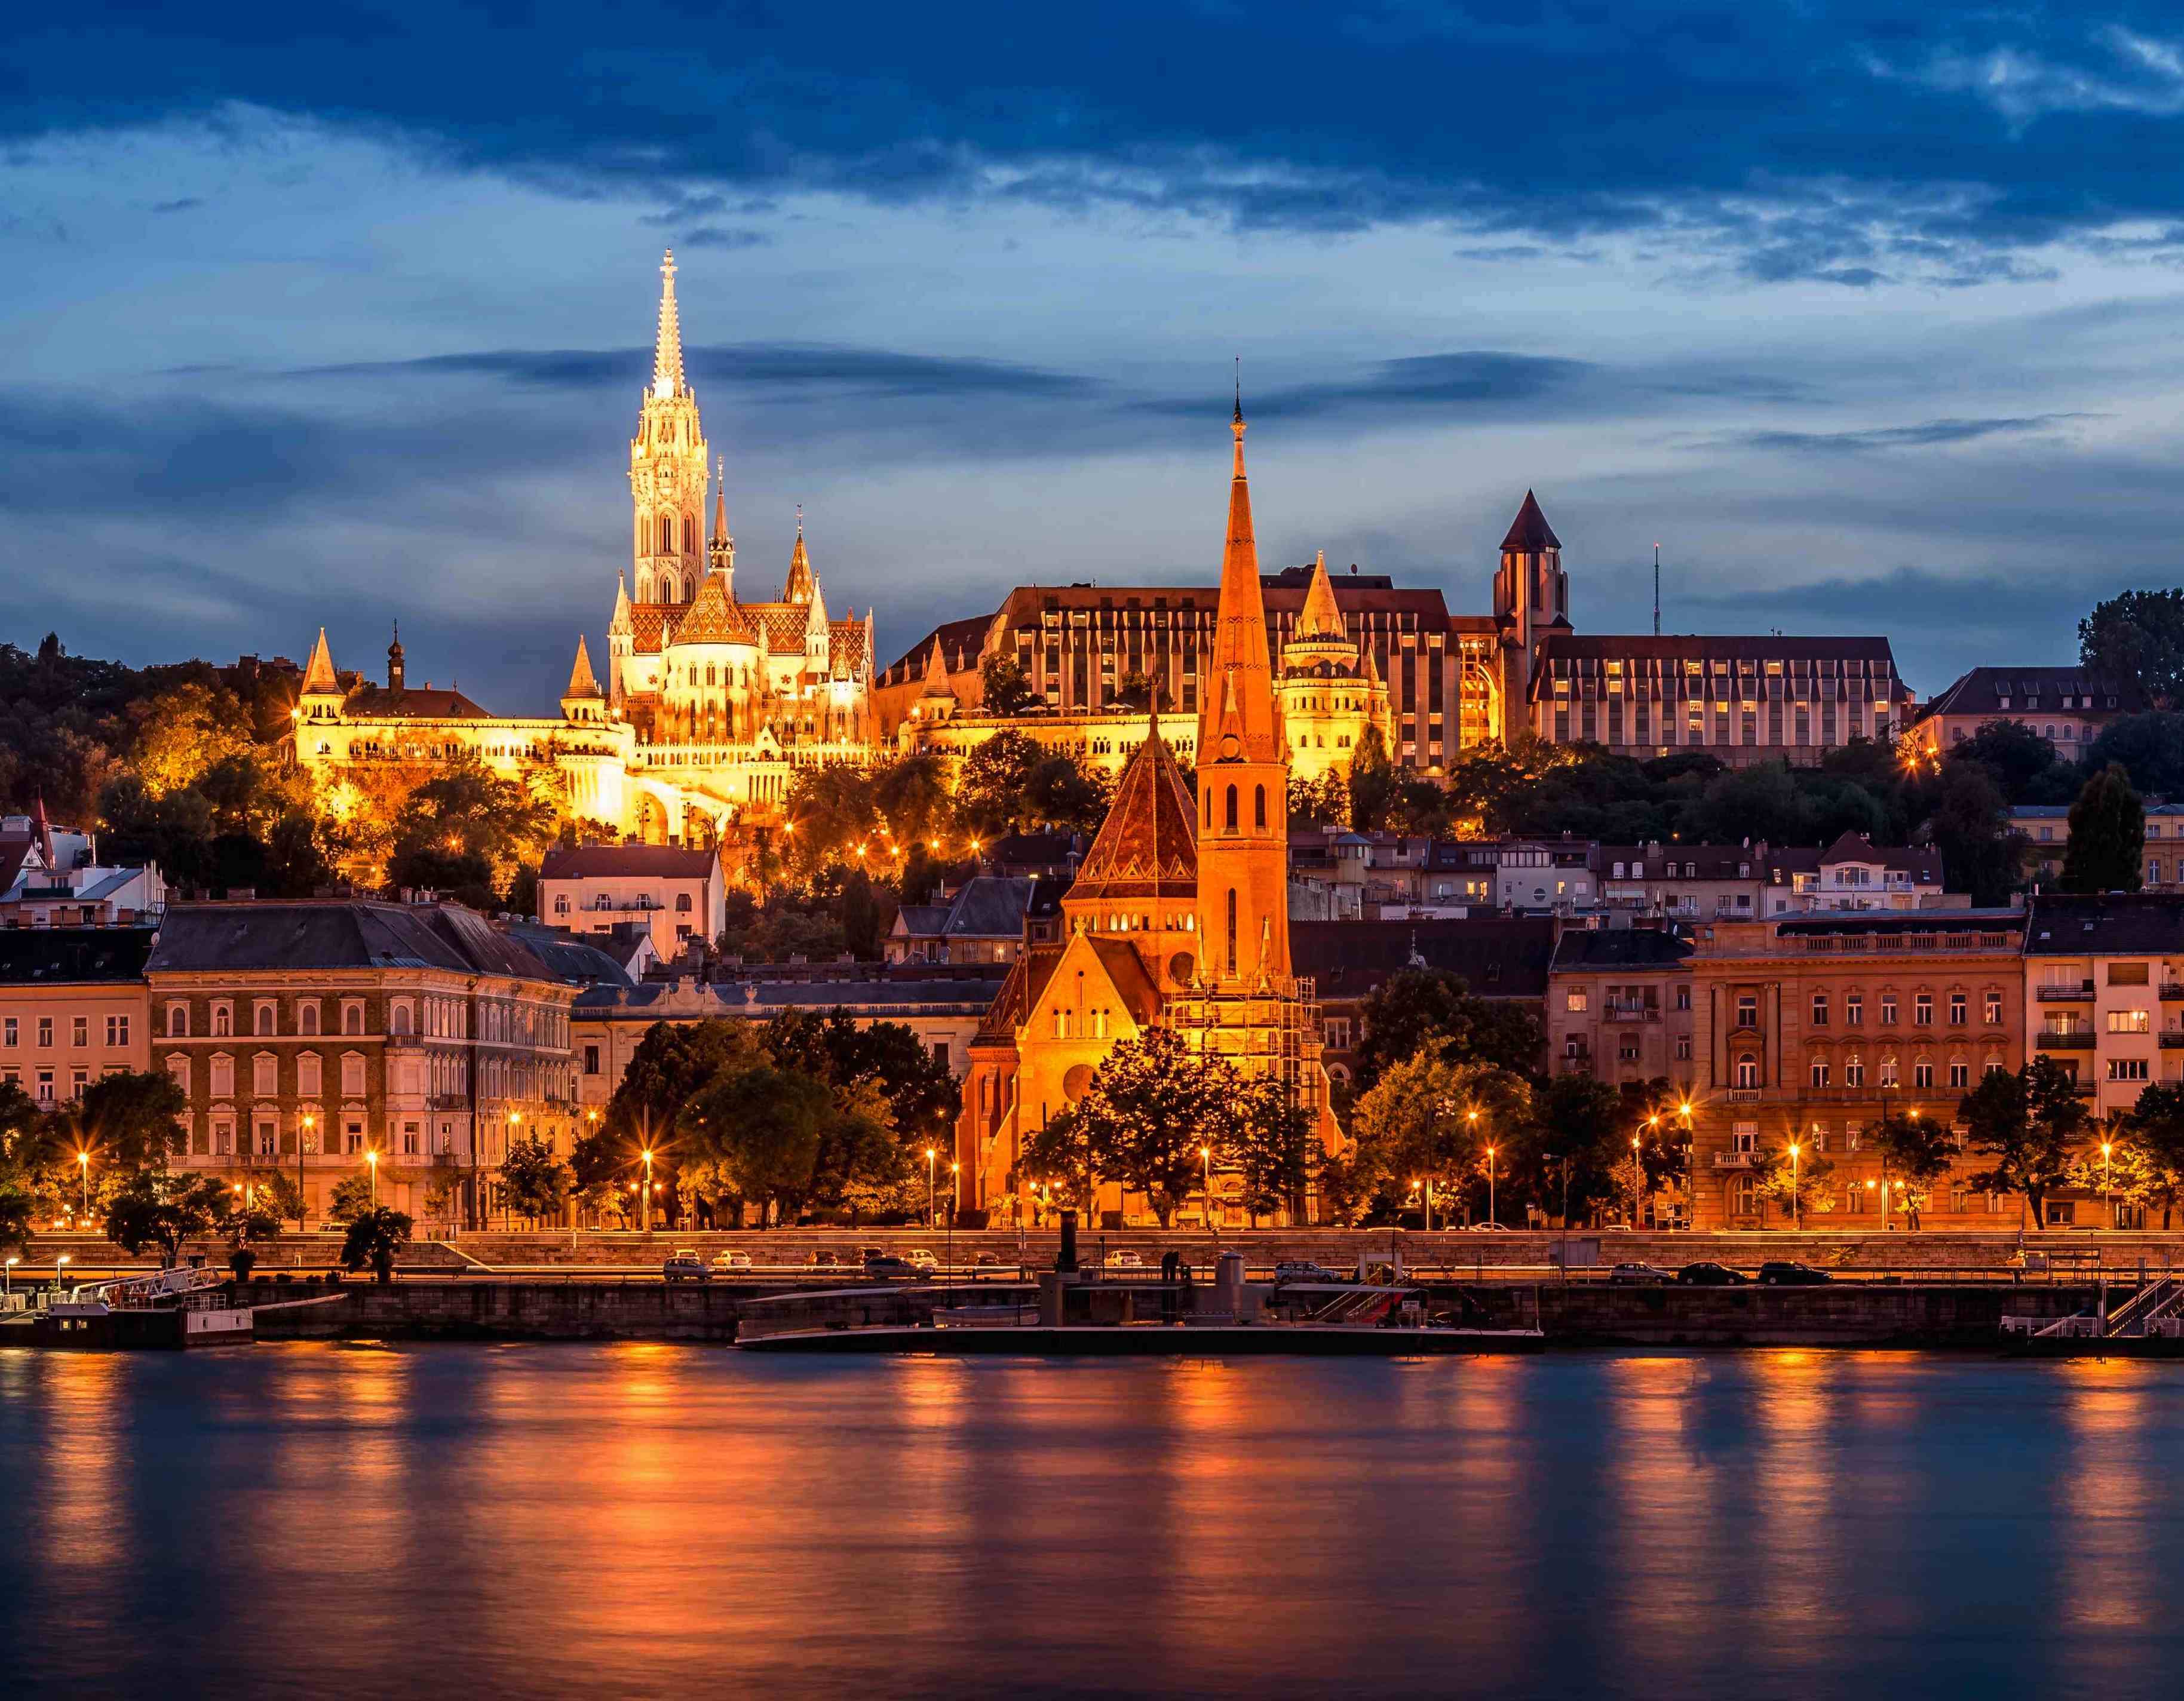 Evening view at the Buda quarter in Budapest